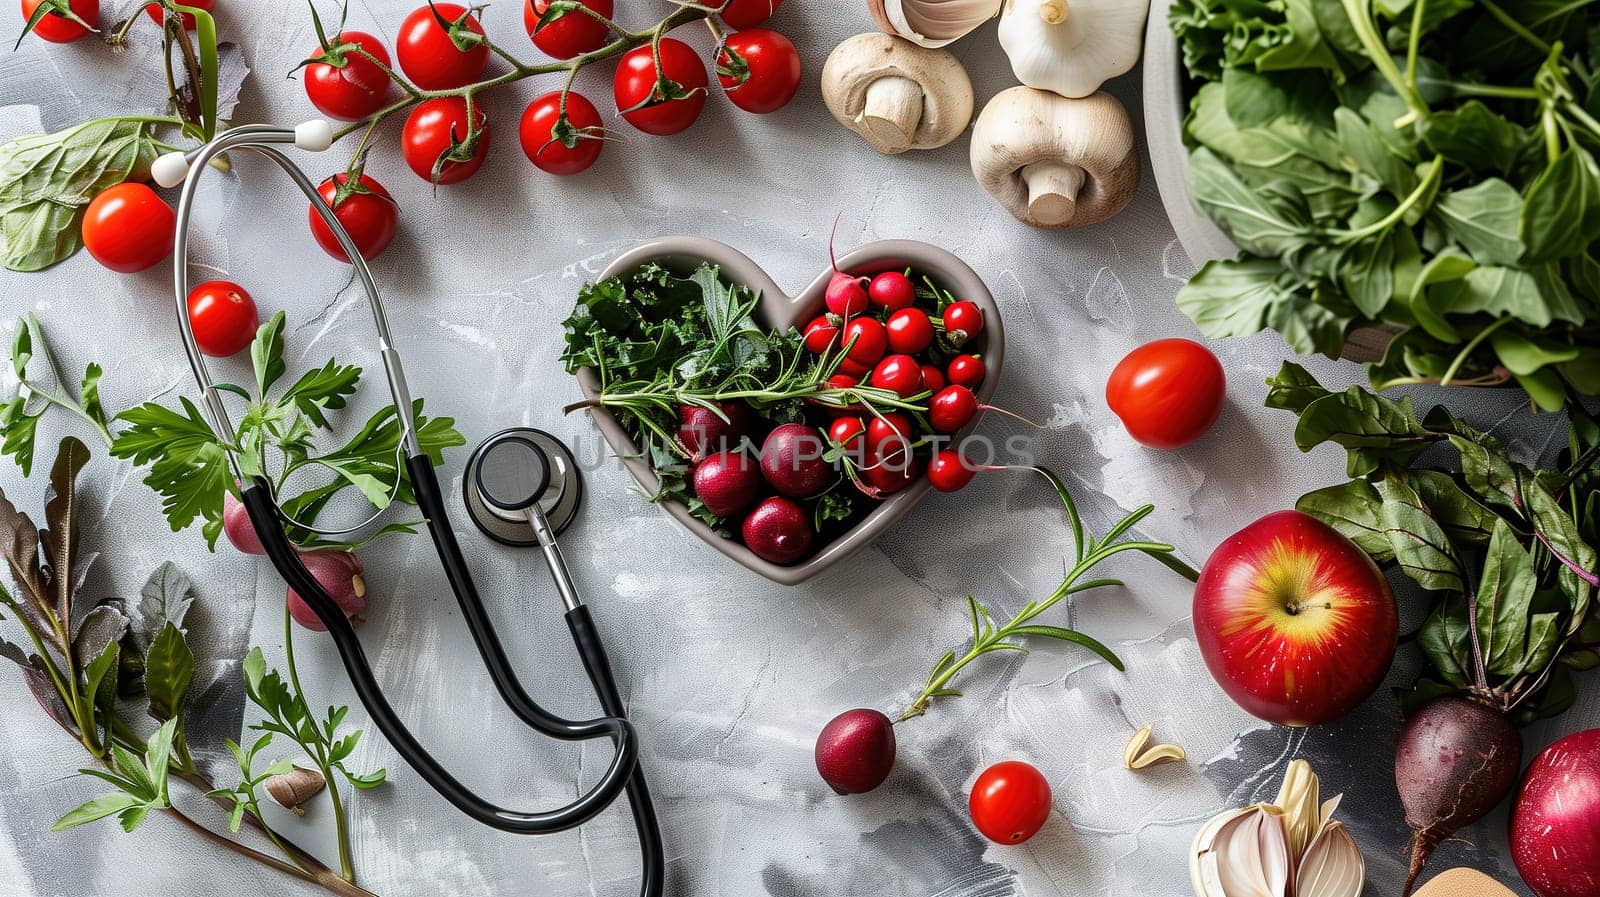 A variety of fresh vegetables like tomatoes, cucumbers, and bell peppers are neatly arranged on a wooden table. A stethoscope is placed among the vegetables, creating an unusual pairing that suggests a connection between health and nutrition.